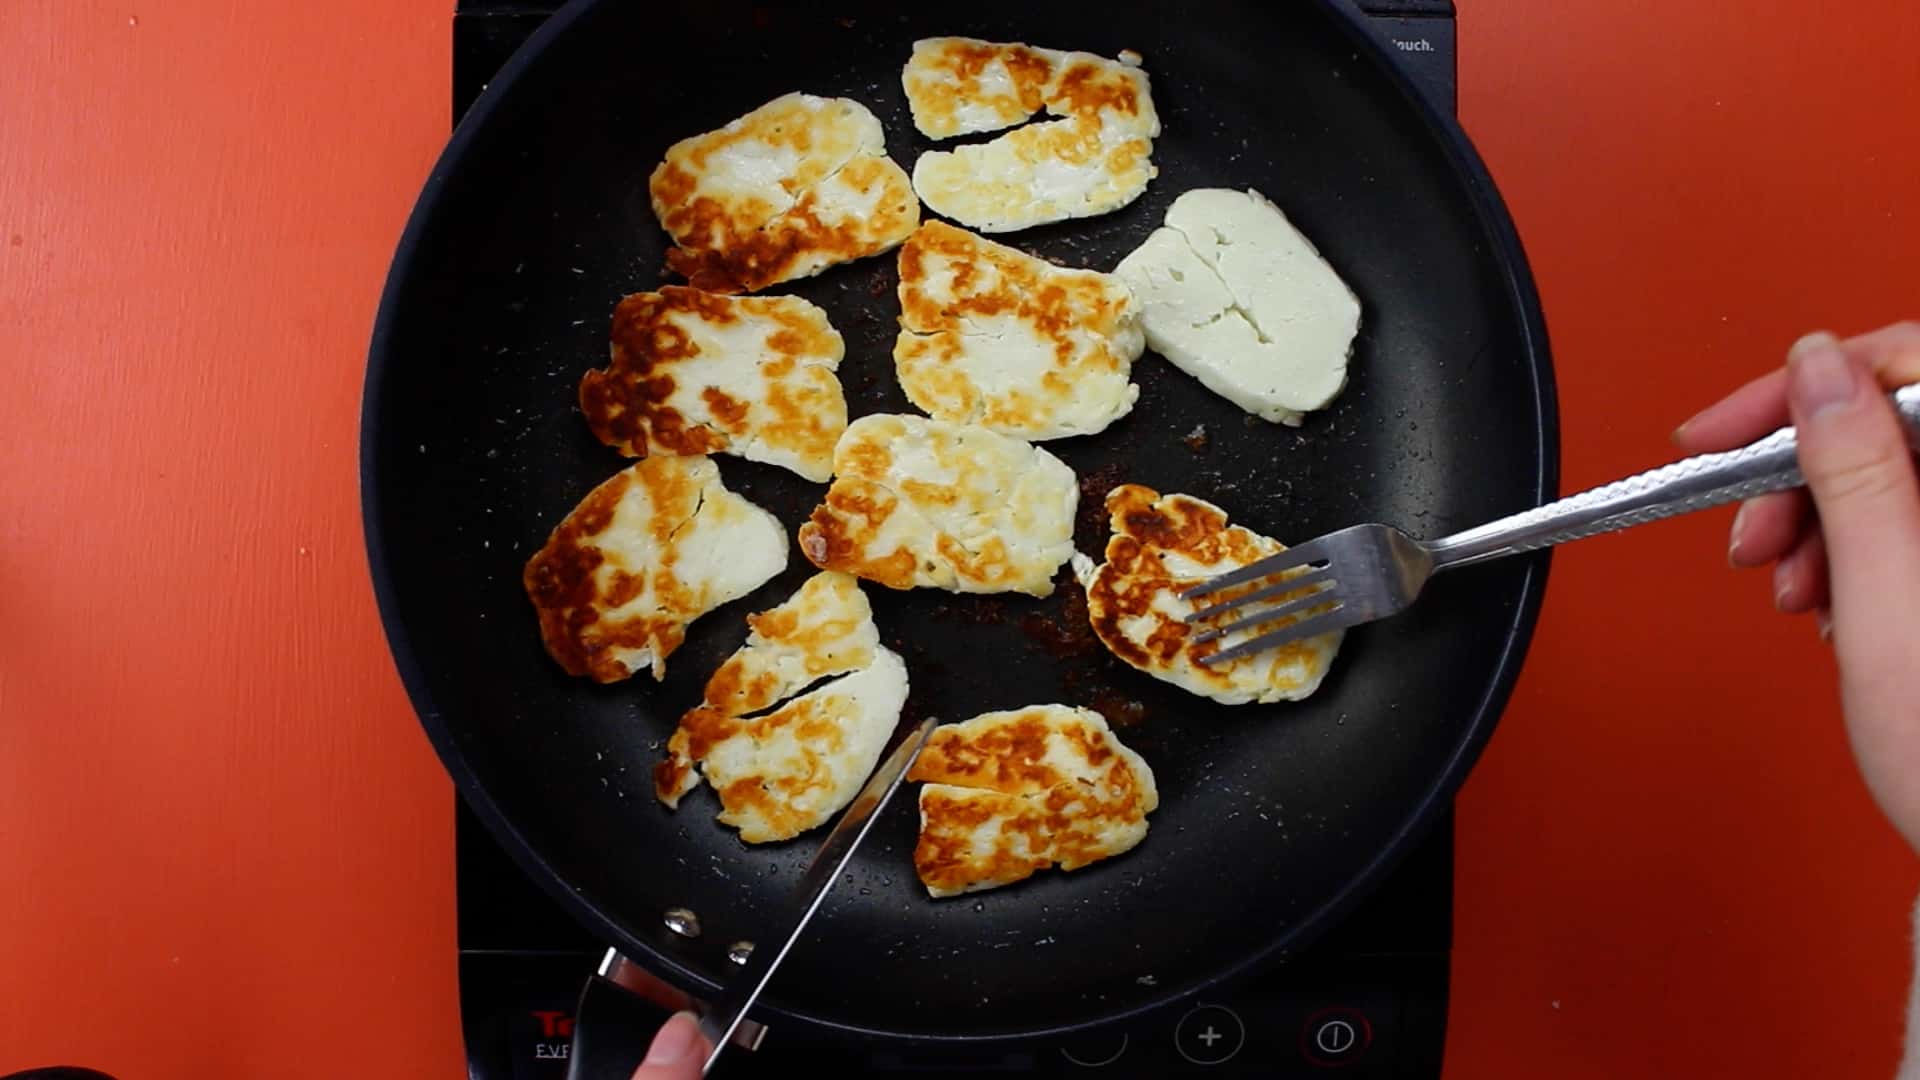 Halloumi browned in frying pan